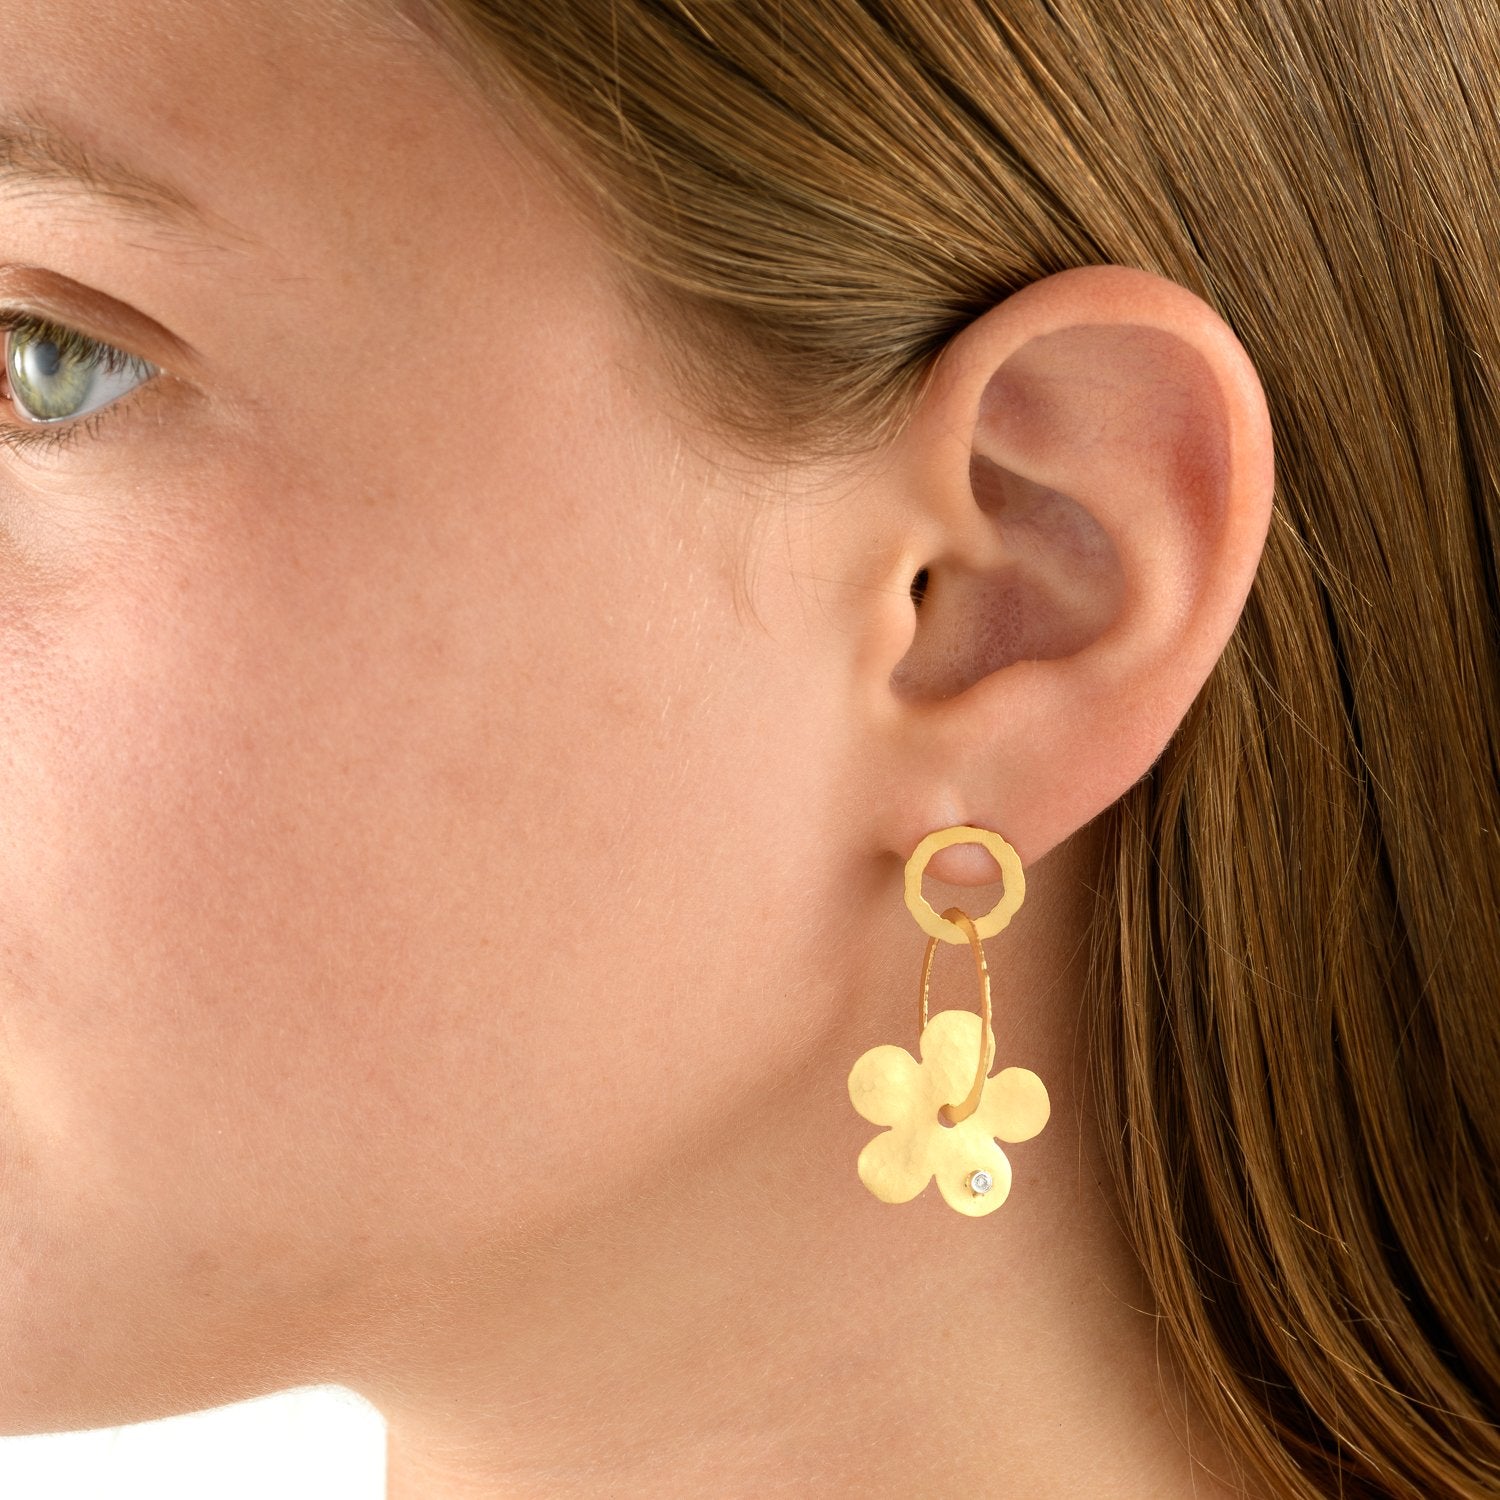 2409 - 14kt yellow gold dangling earring, textured matte finish with diamonds. post and friction back. 